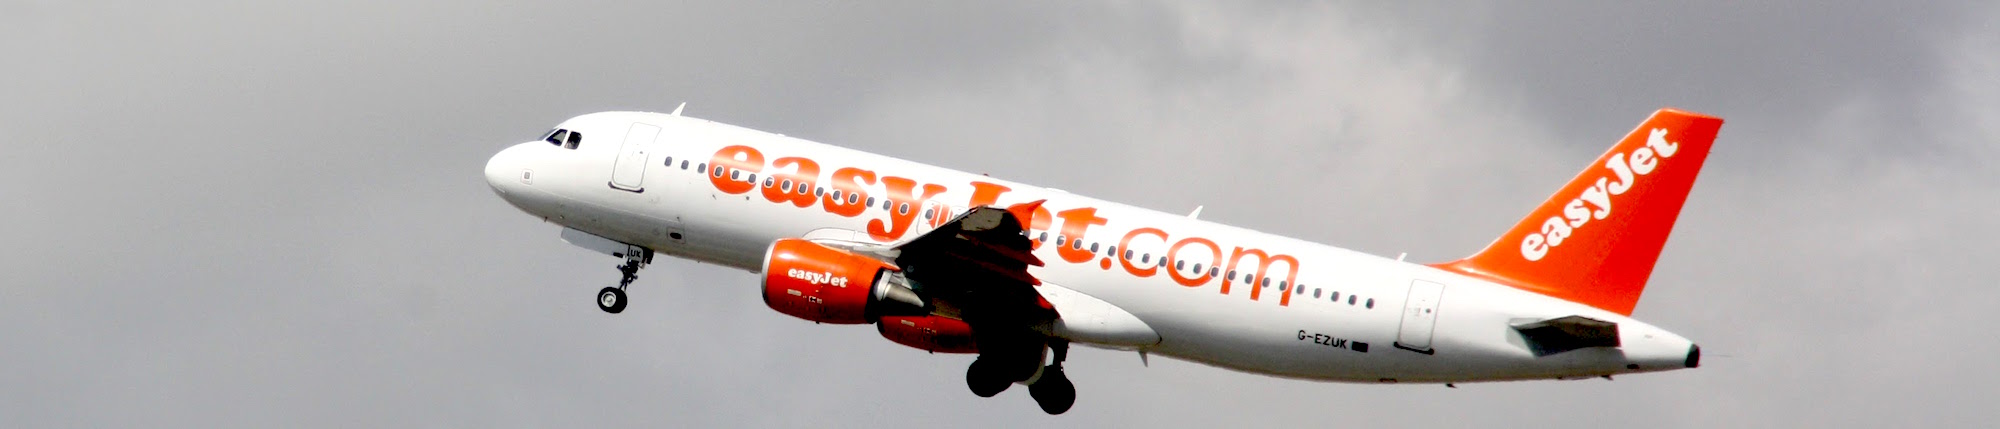 Best time to book flights for Edinburgh (EDI) to London (LTN) flights with EasyJet at AirHint